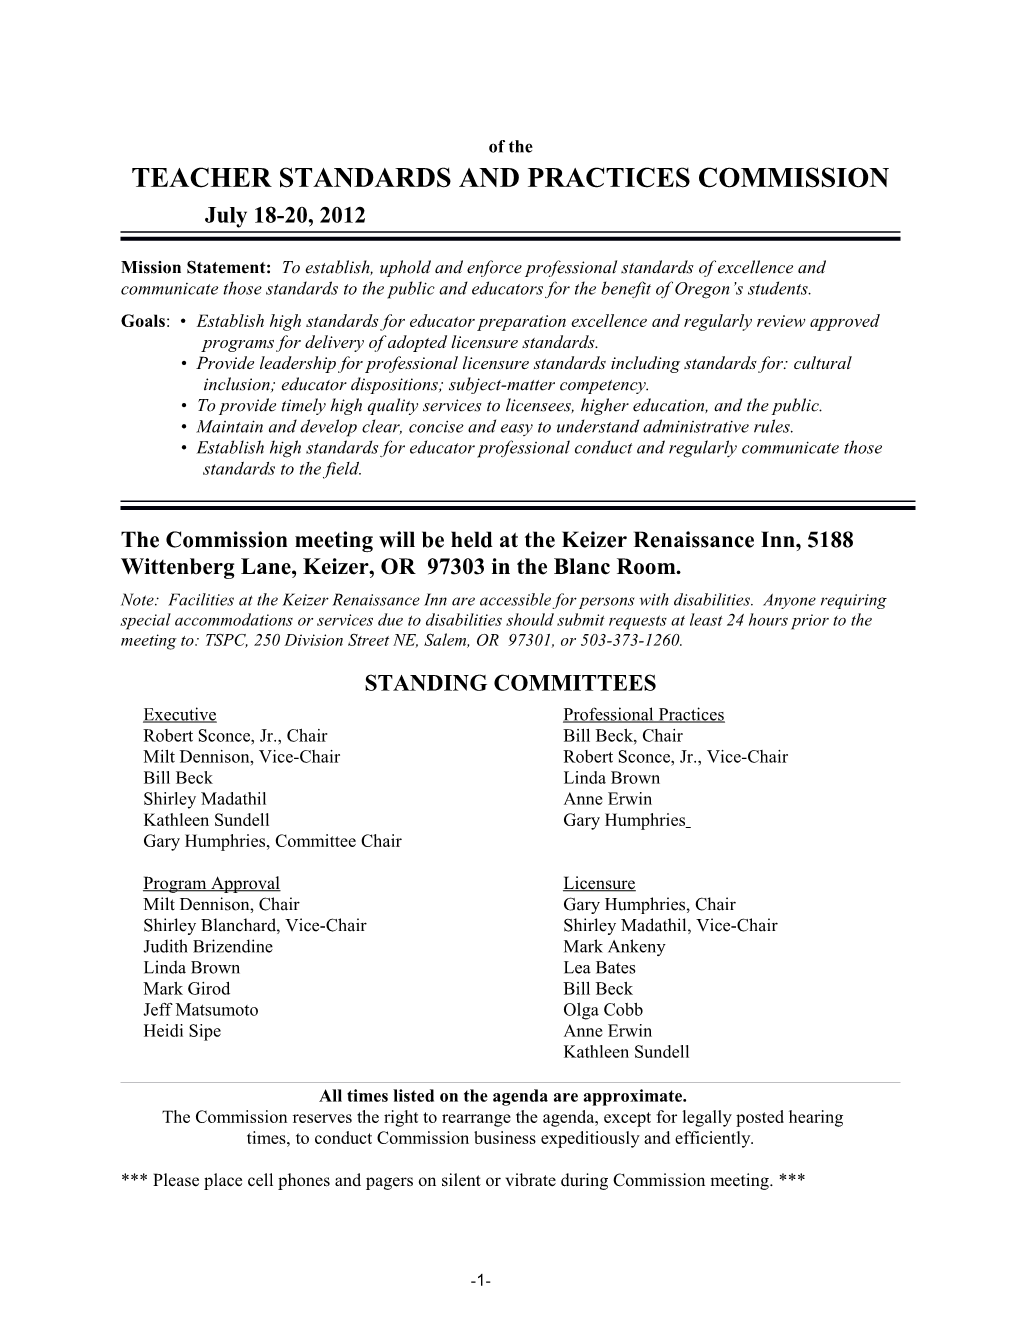 Teacher Standards and Practices Commission s3